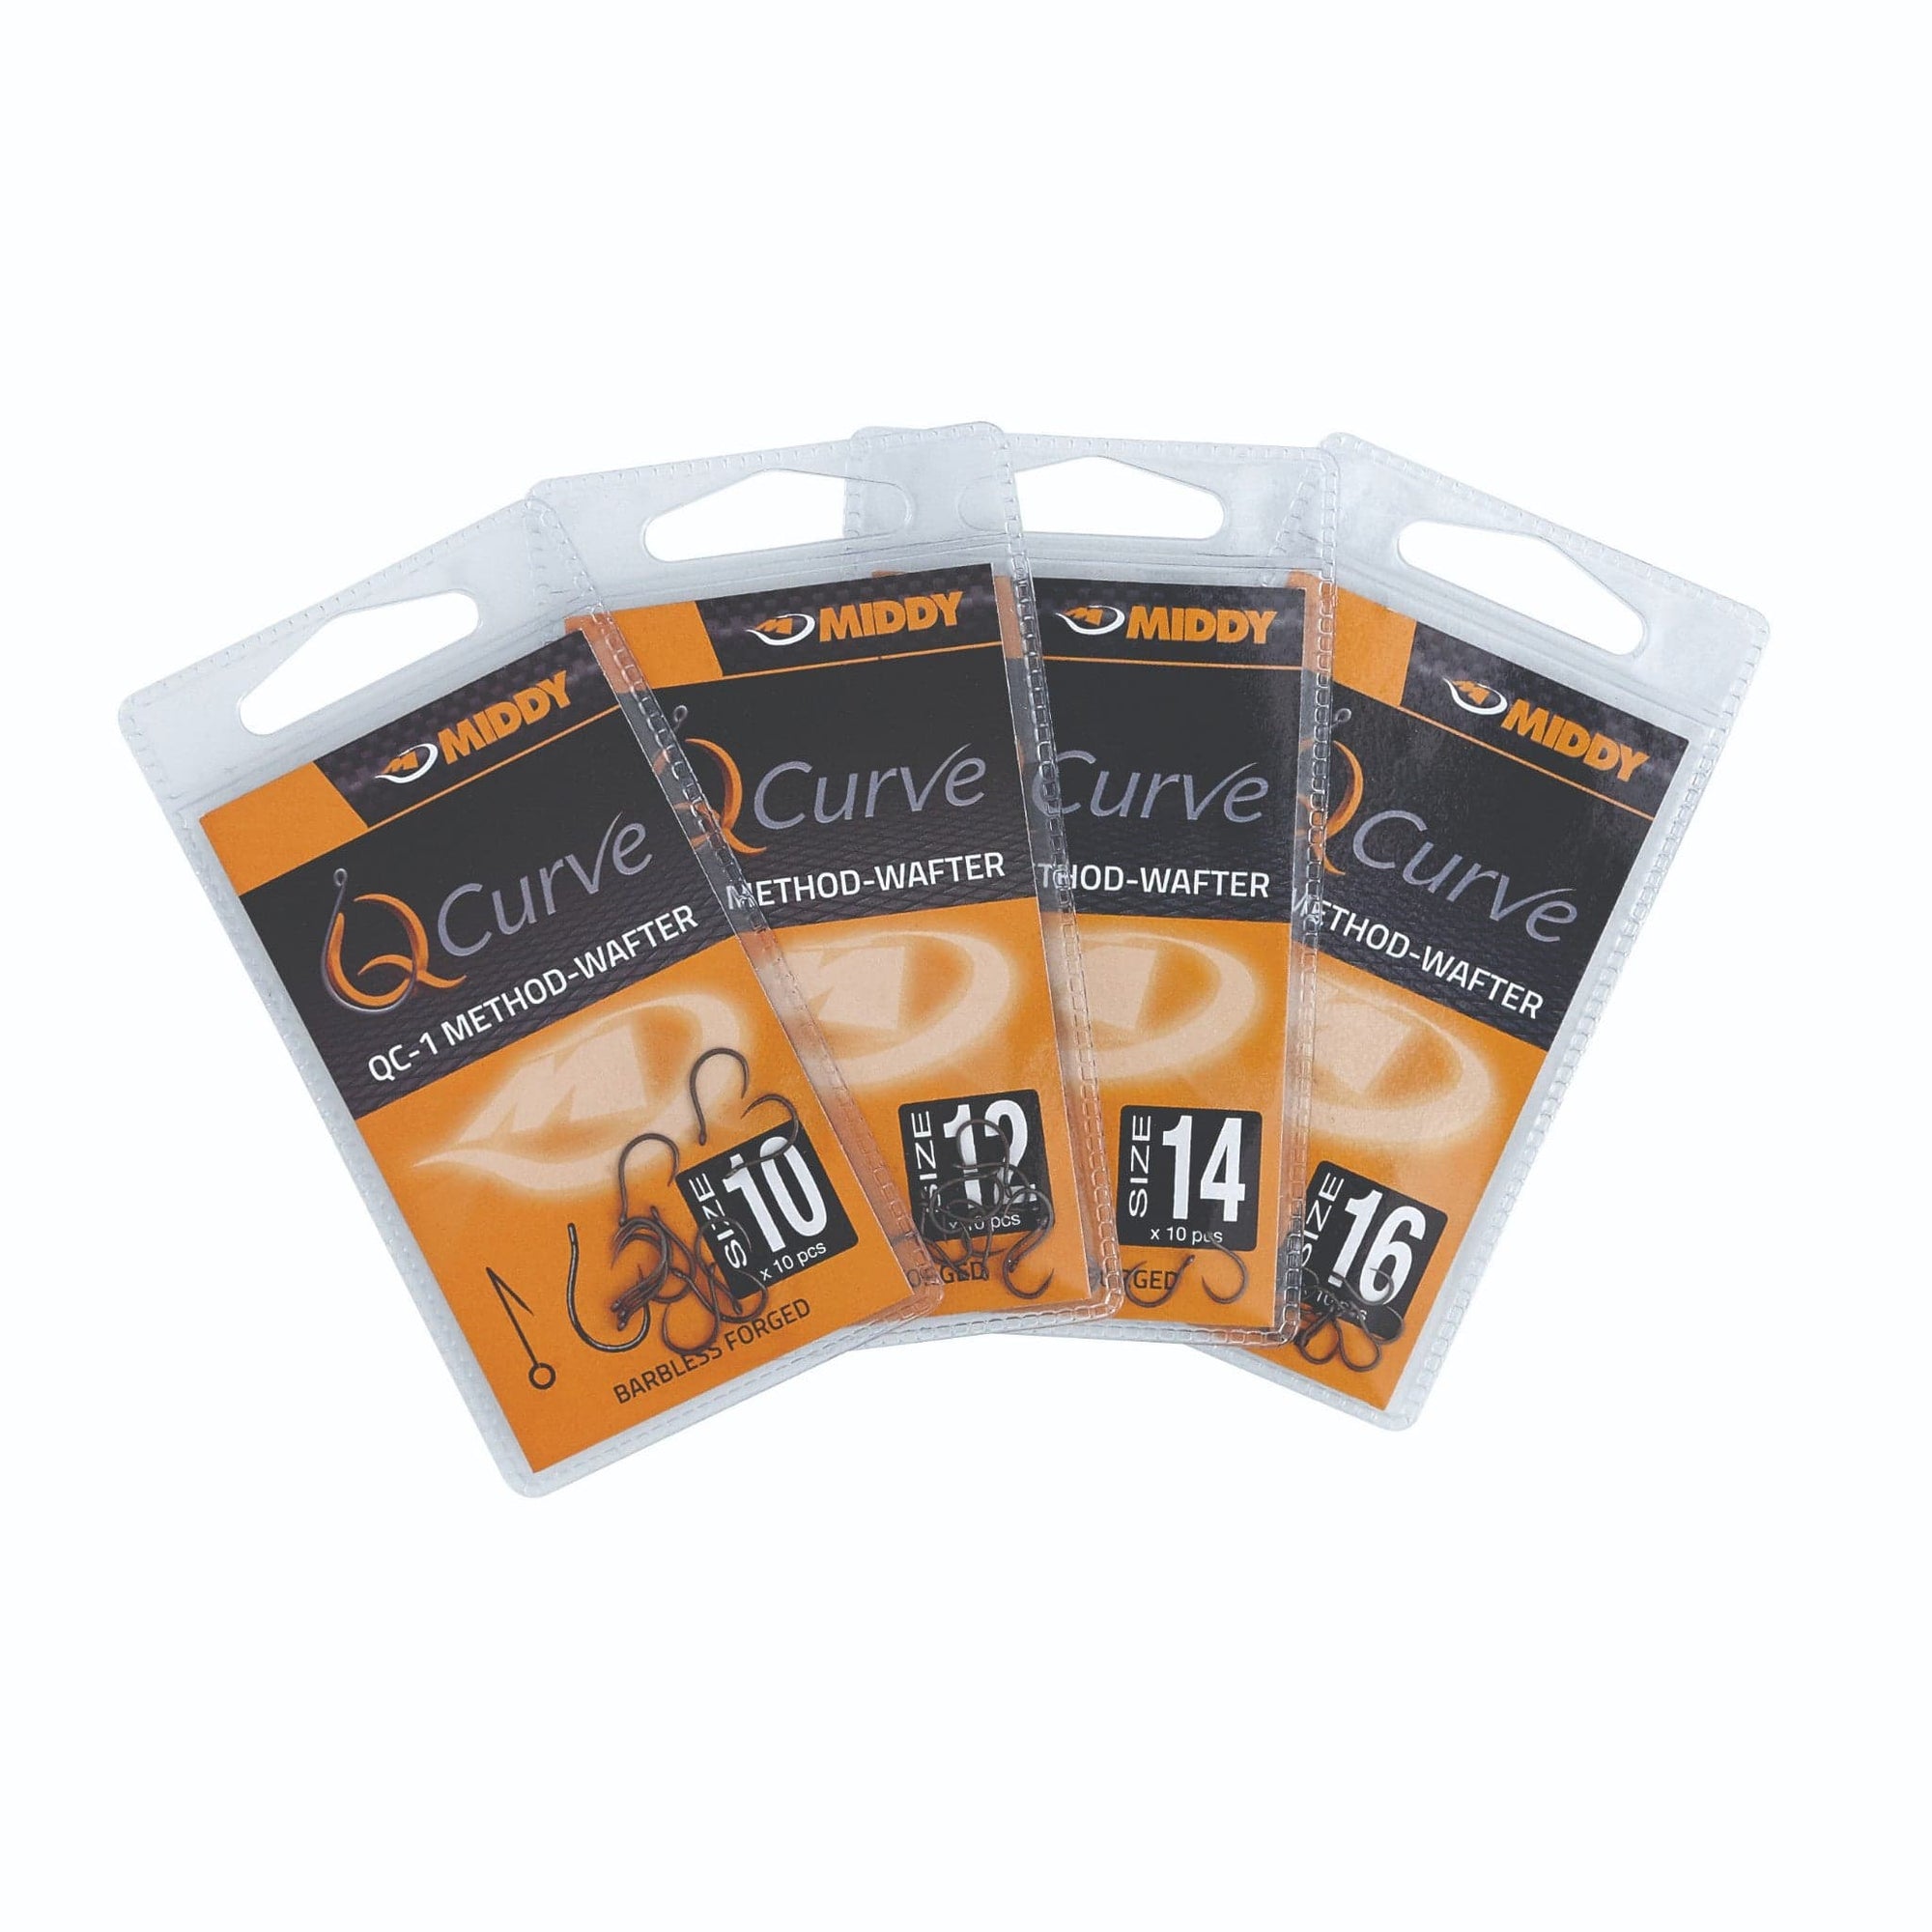 MIDDY QC-1 Method-Wafter Eyed Hooks size 10 - 16 (10pc pkt) - NEW Model.